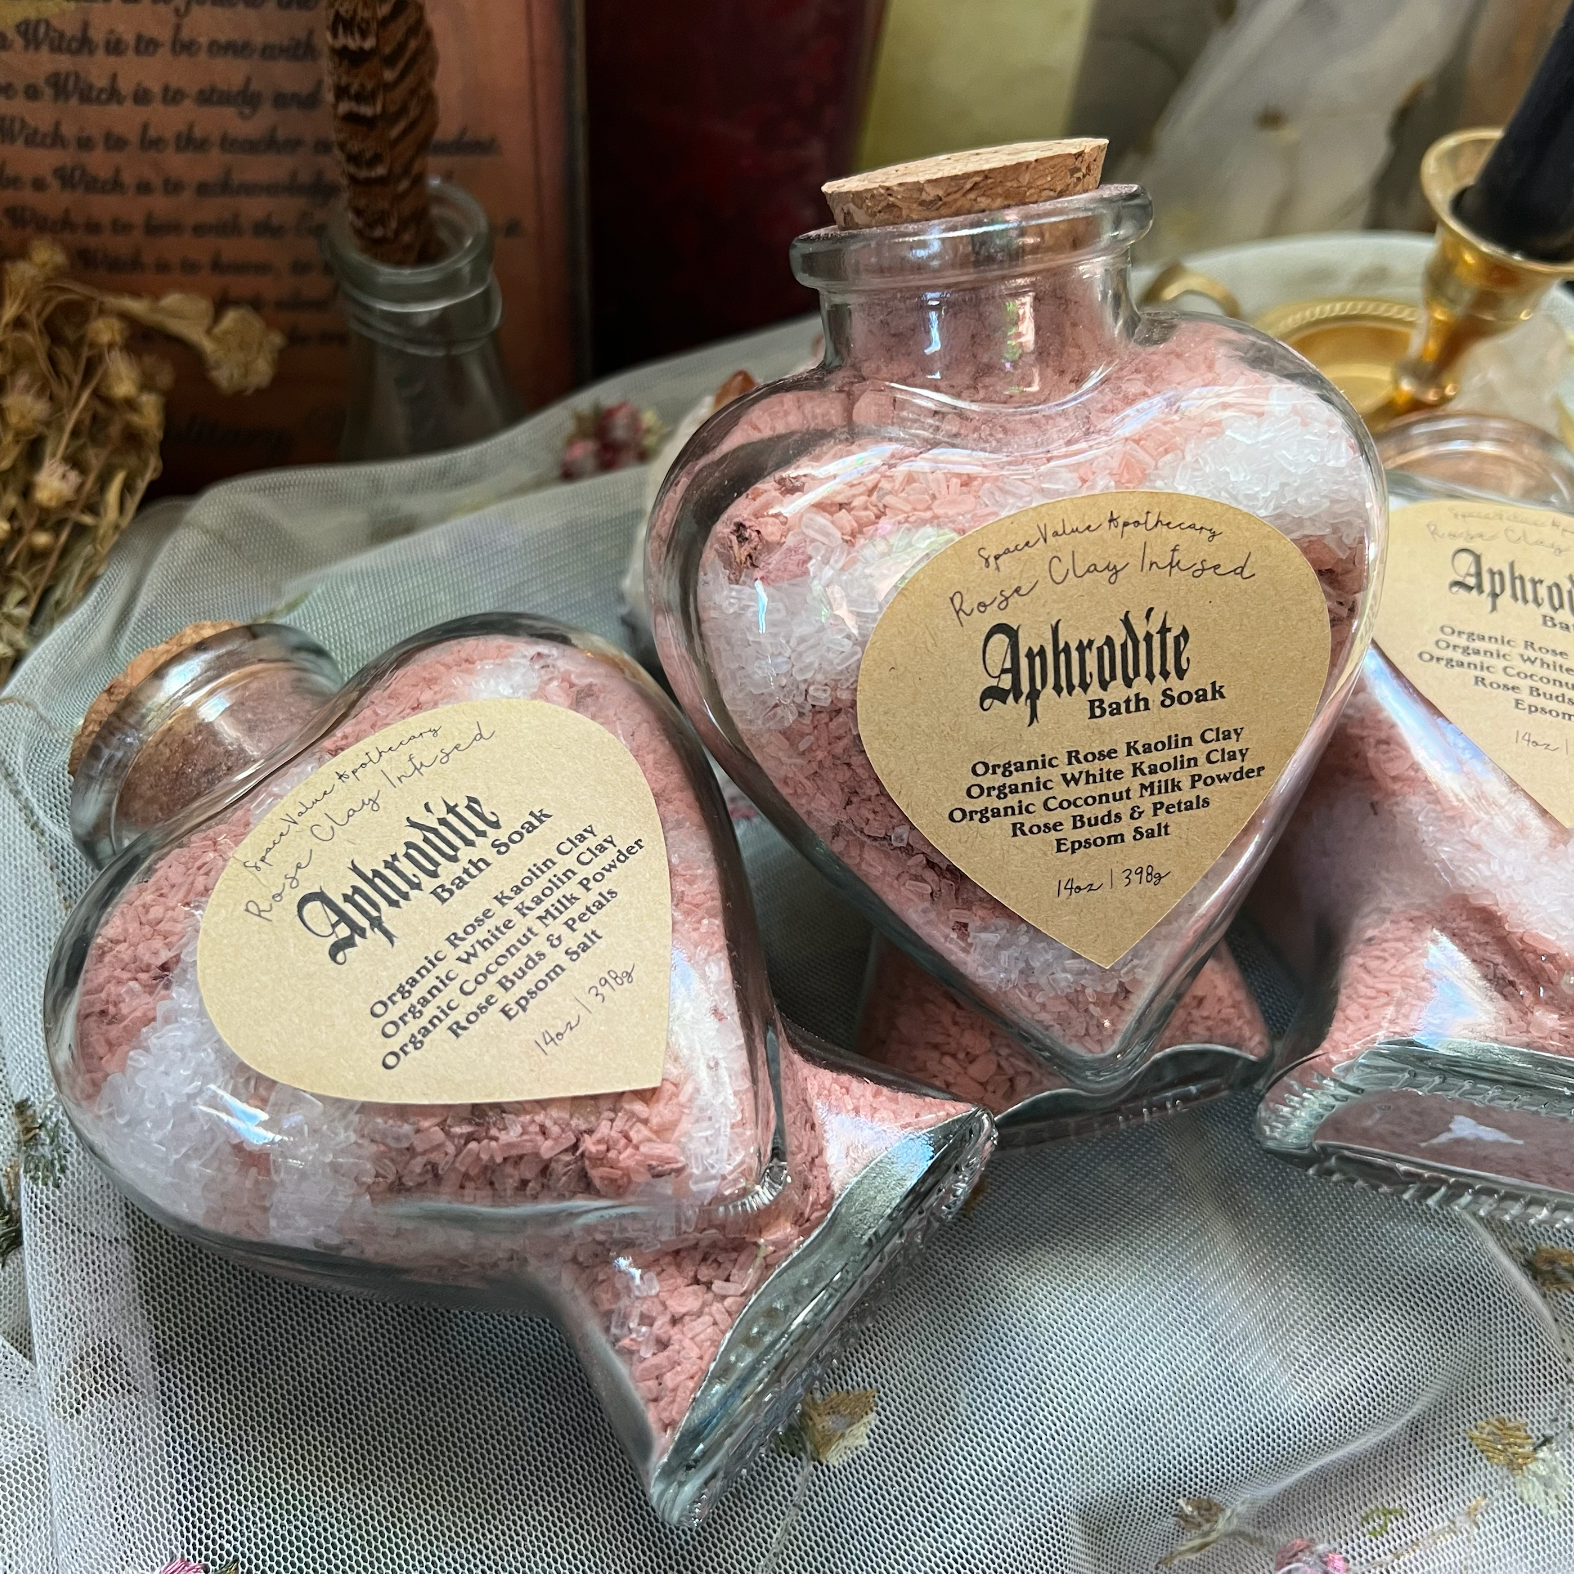 Witches Bells 1 – Spacevalue Apothecary